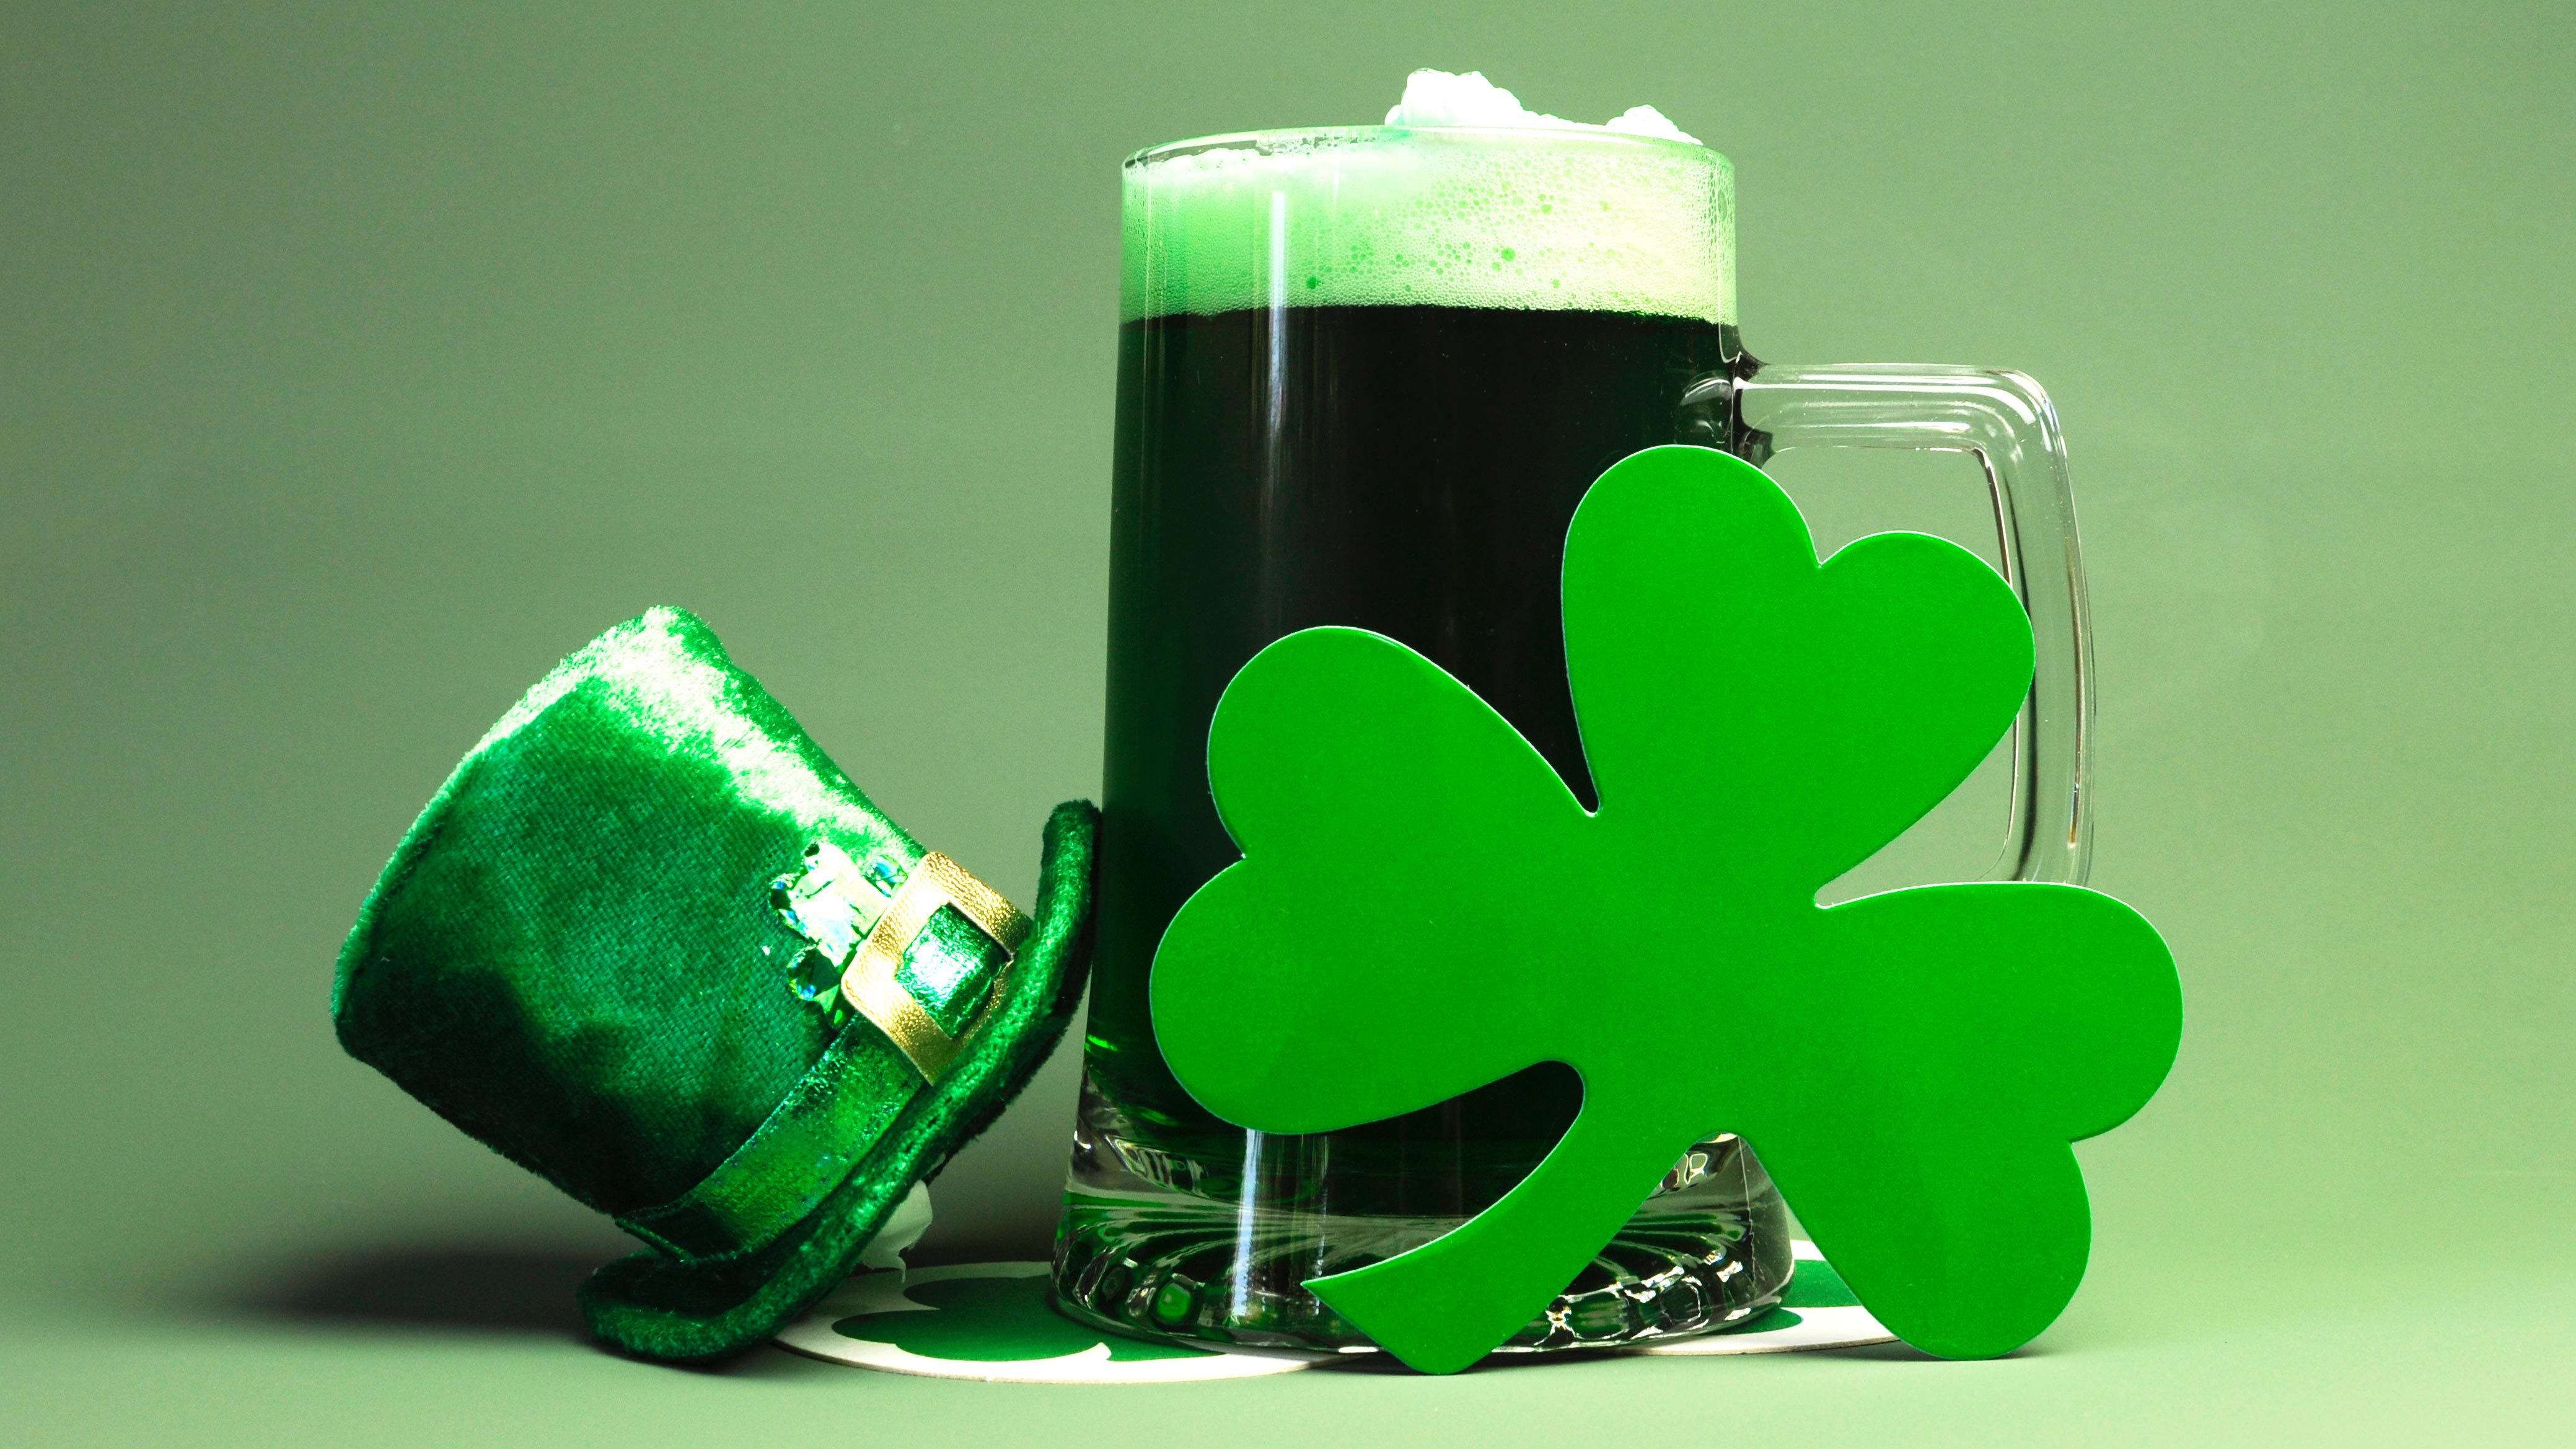 How Did St. Patrick's Day a Drinking Holiday? Reader's Digest